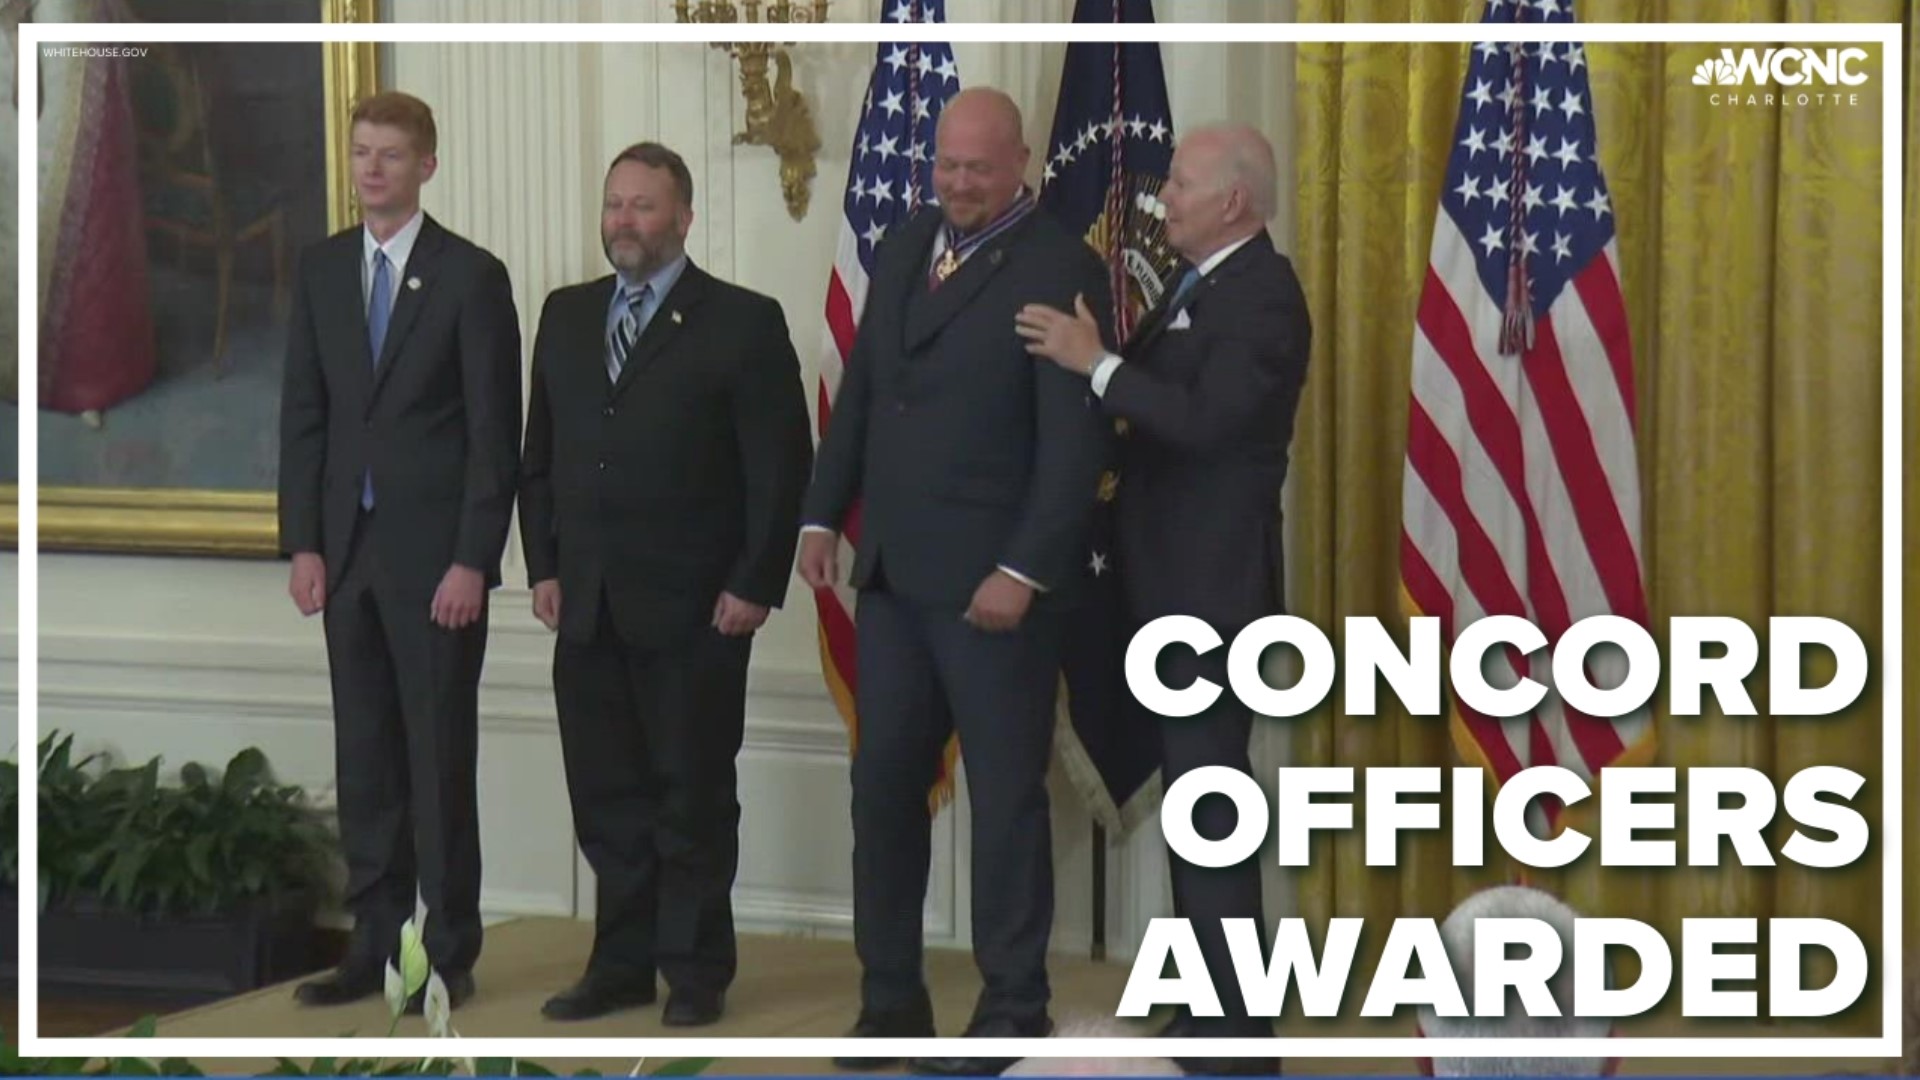 President Biden awarded fallen officer Jason Shuping and officers Kyle Baker, Paul Stackenwalt and Caleb Robinson with medals of valor.